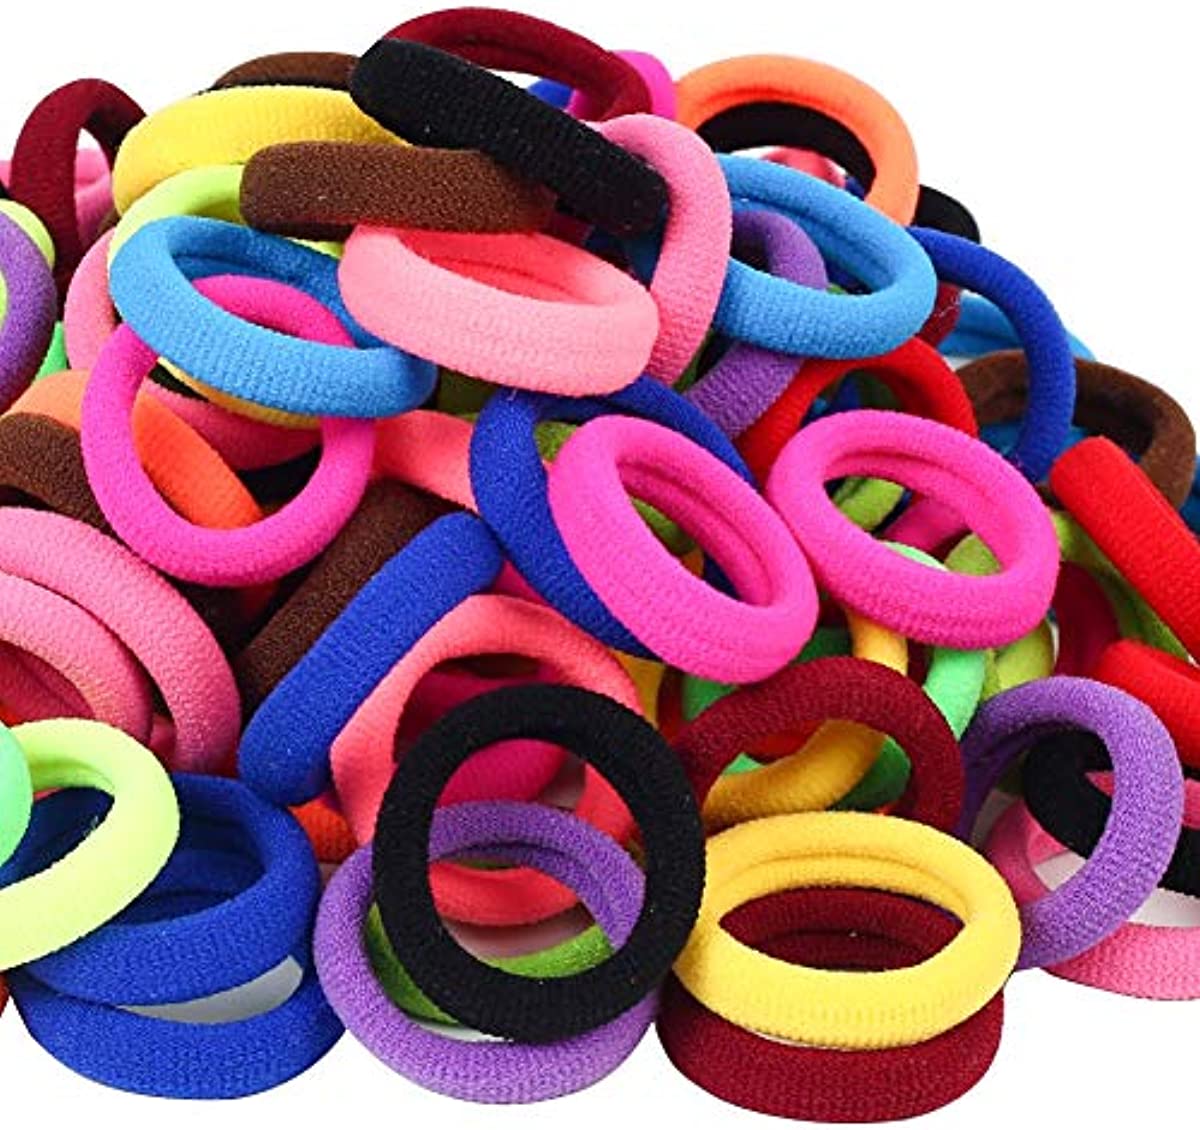 120 Pcs Baby Hair Ties, Cotton Toddler Hair Ties for Girls and Kids, Multicolor Small Seamless Hair Bands Elastic Ponytail Holders(15 Colors )